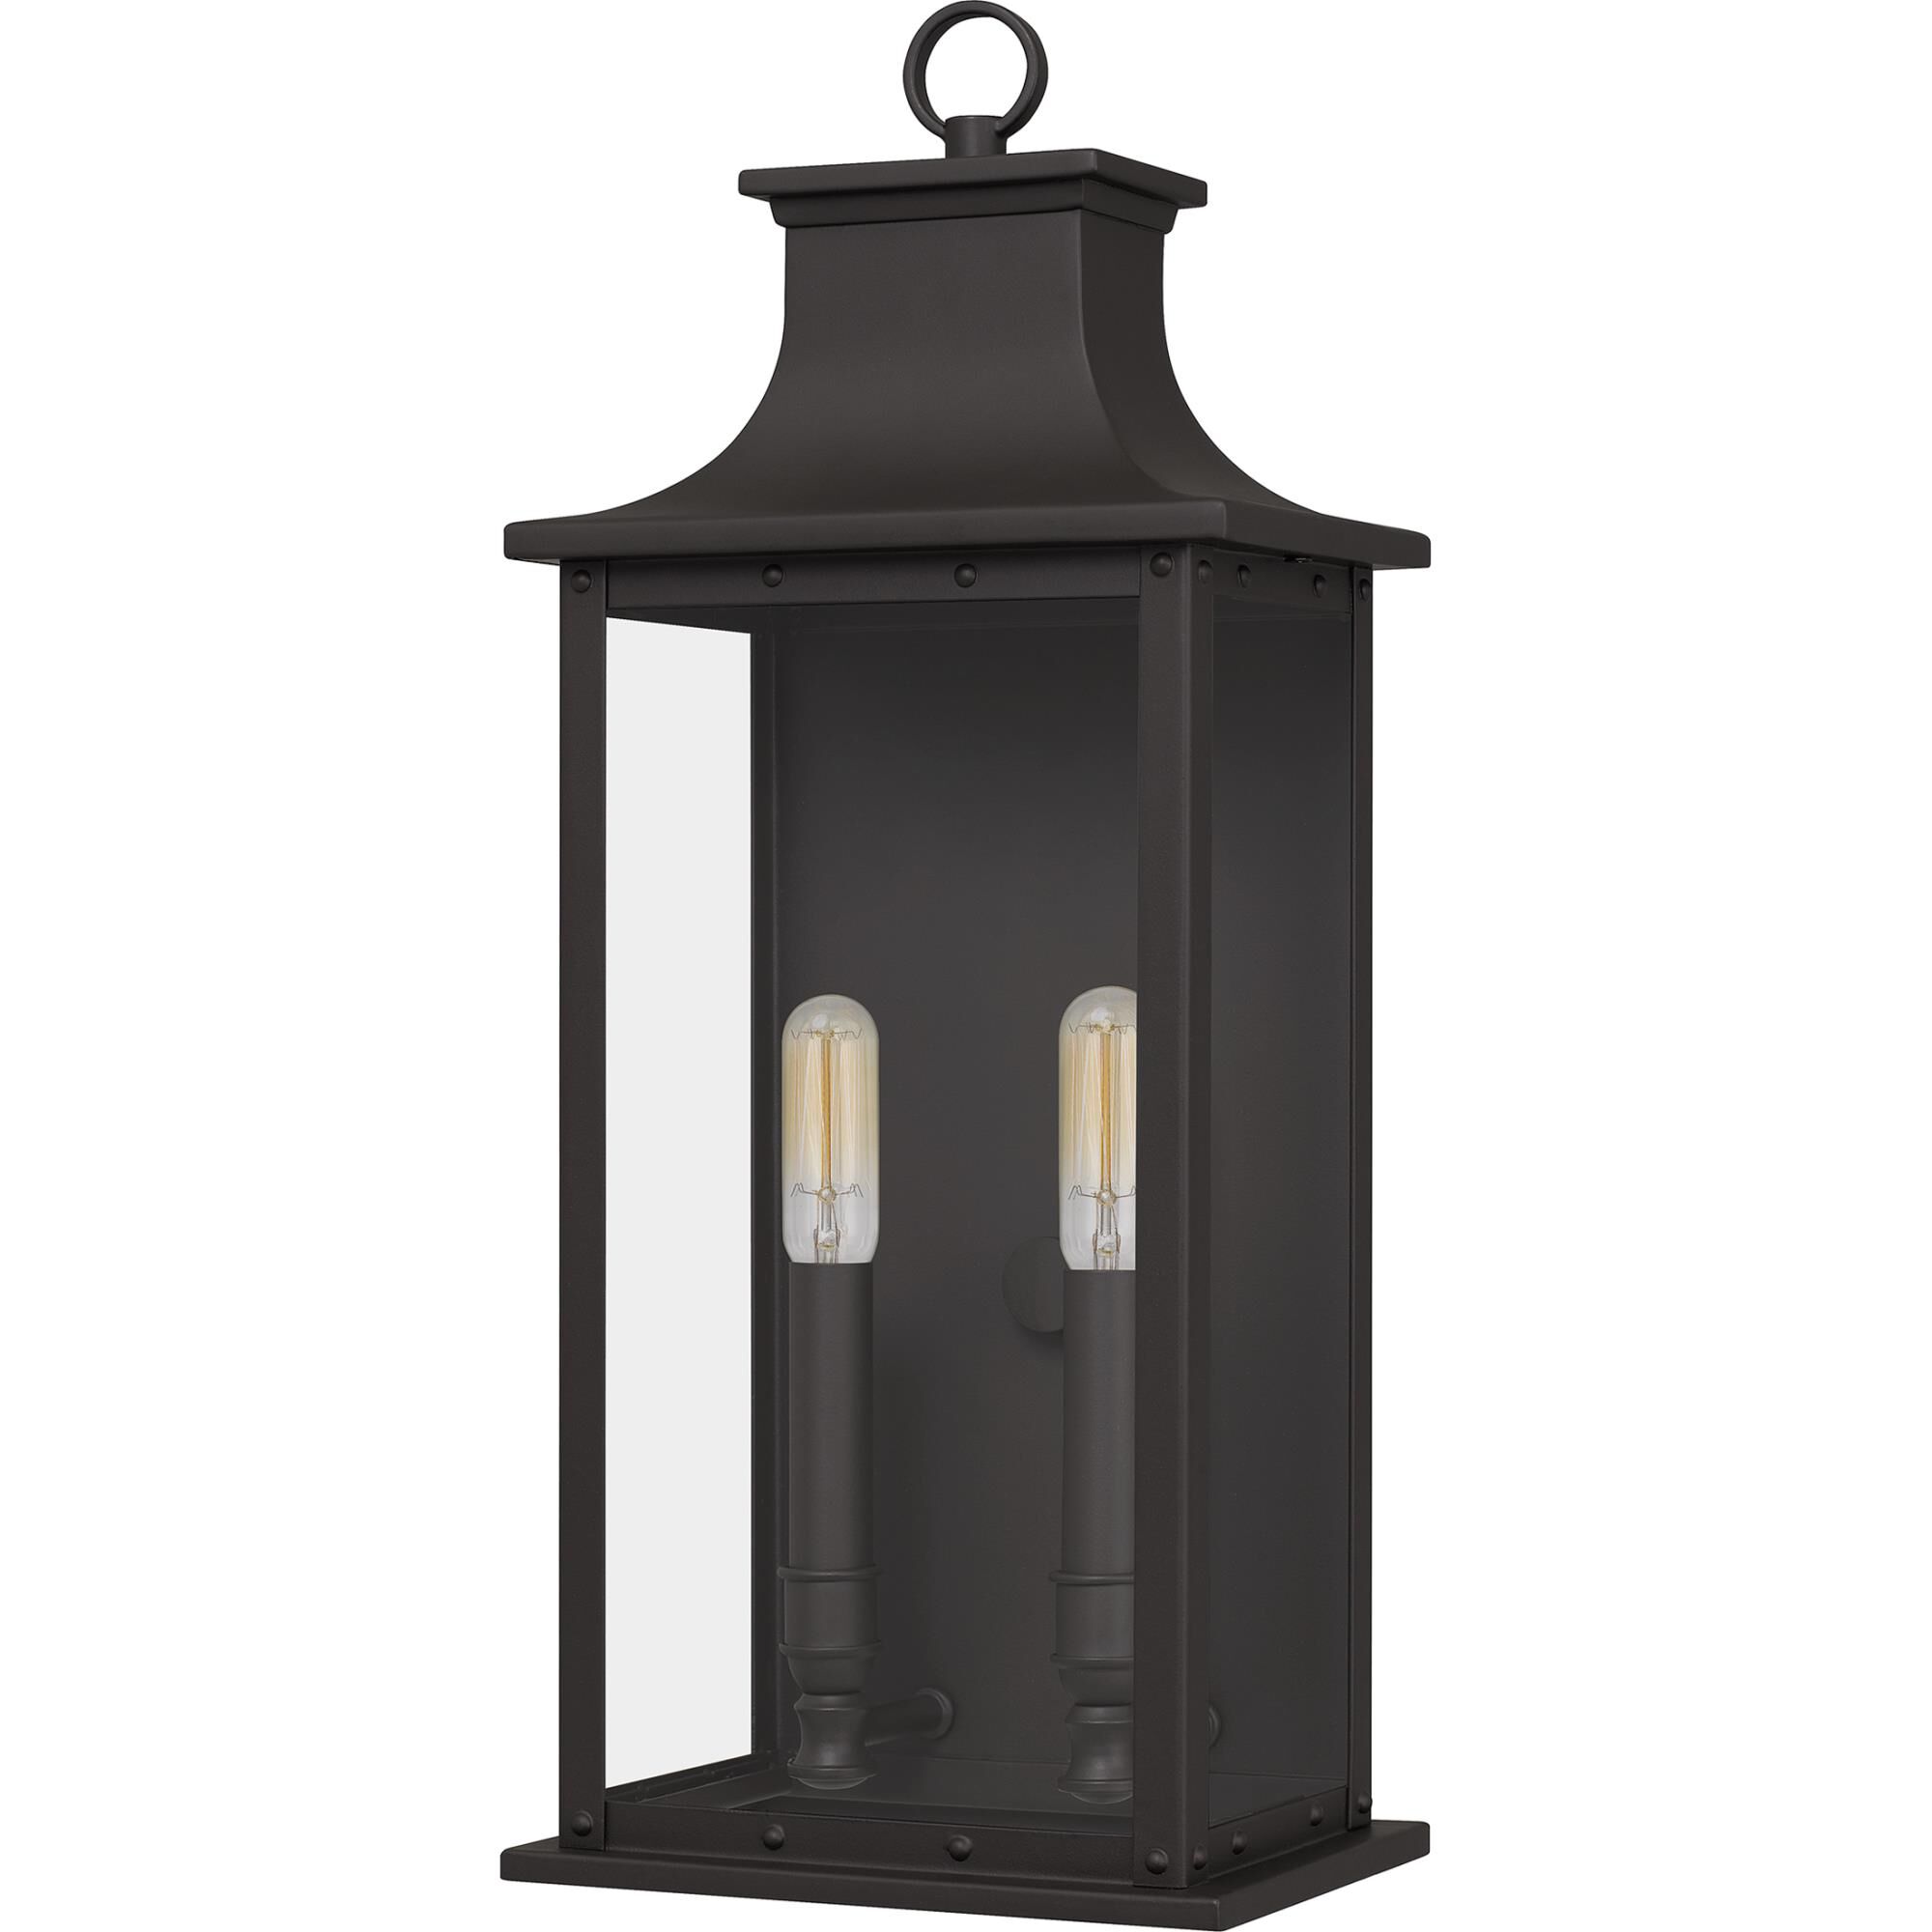 Photos - Chandelier / Lamp Quoizel Abernathy 19 Inch Tall 2 Light Outdoor Wall Light Abernathy - ABY8 